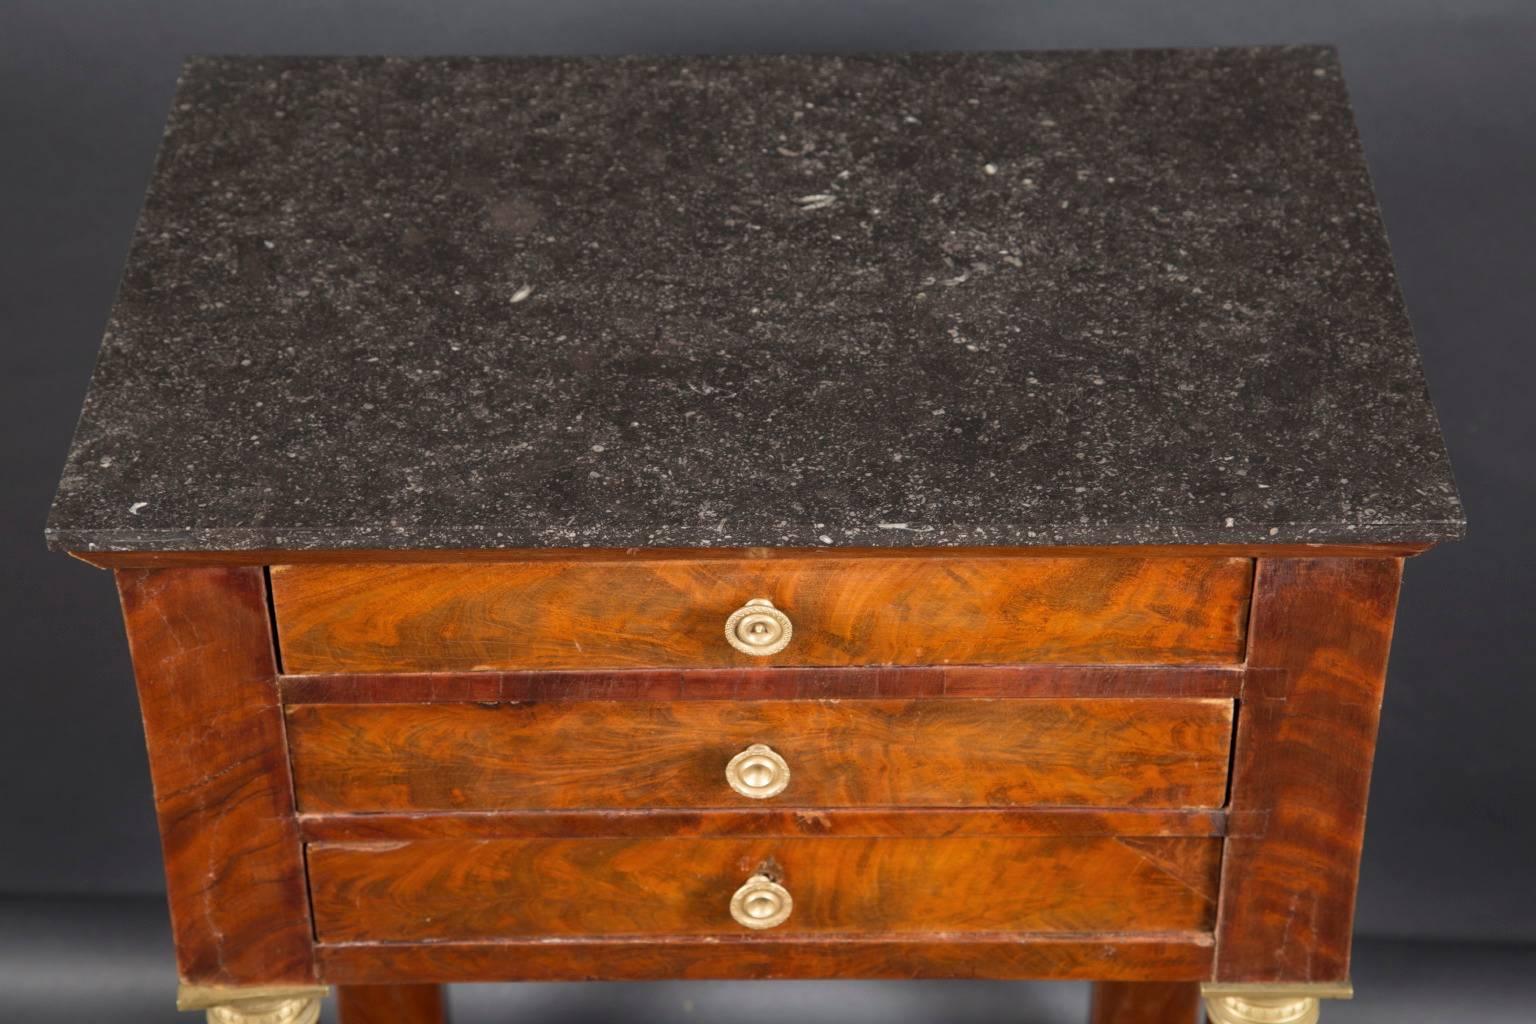 This classic Empire table is made of walnut with a dark grey marble top. The French antique piece dates back to the 19th century and sports cylindrical column legs with bronze feet at the bottom and bronze capitals at its top. Three drawers rest